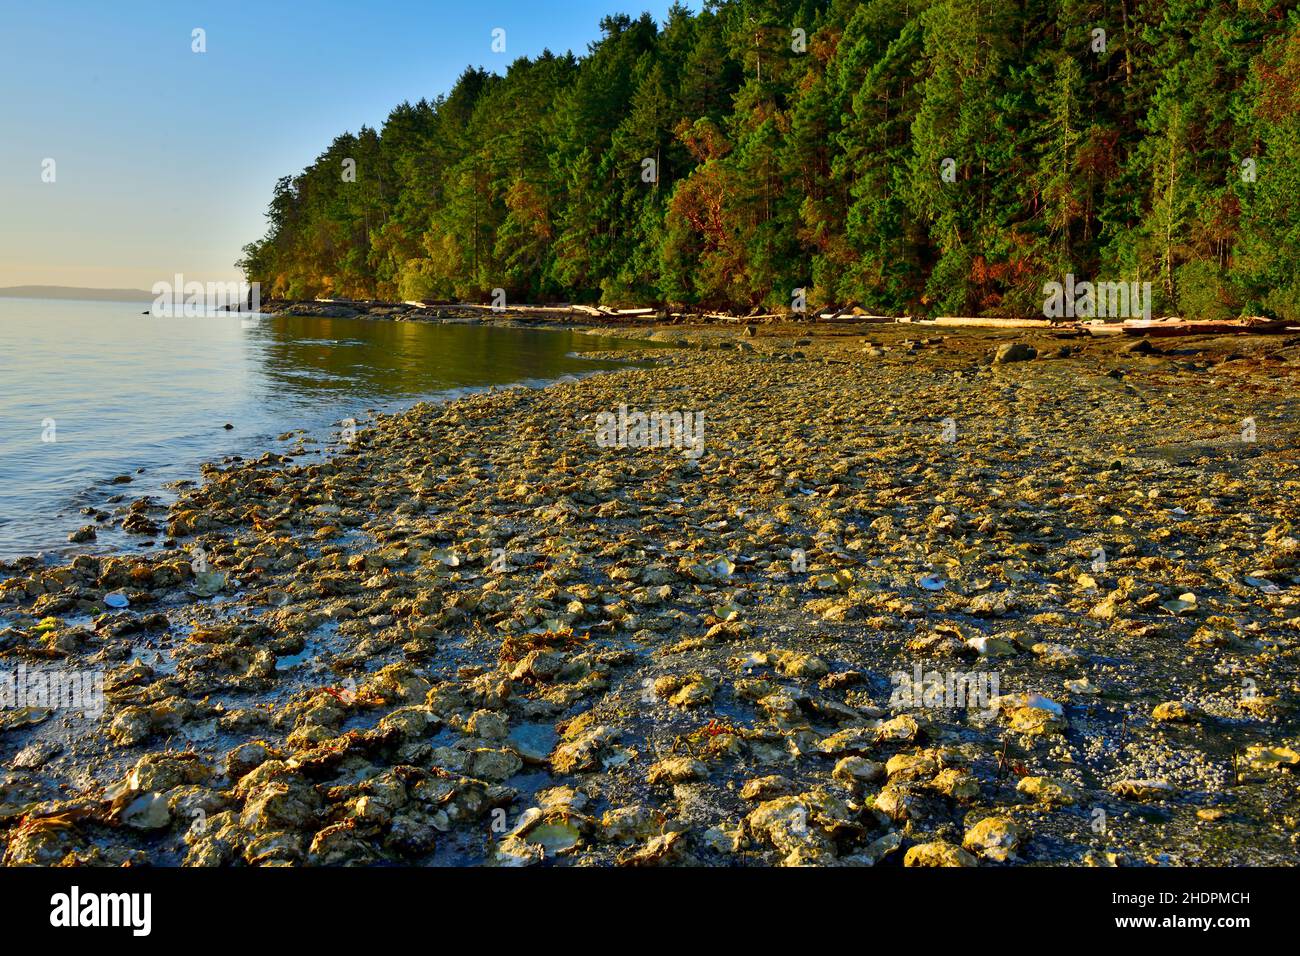 A beach on the east shore of Vancouver Island covered with wild oysters clinging to the rocky seashore. Stock Photo